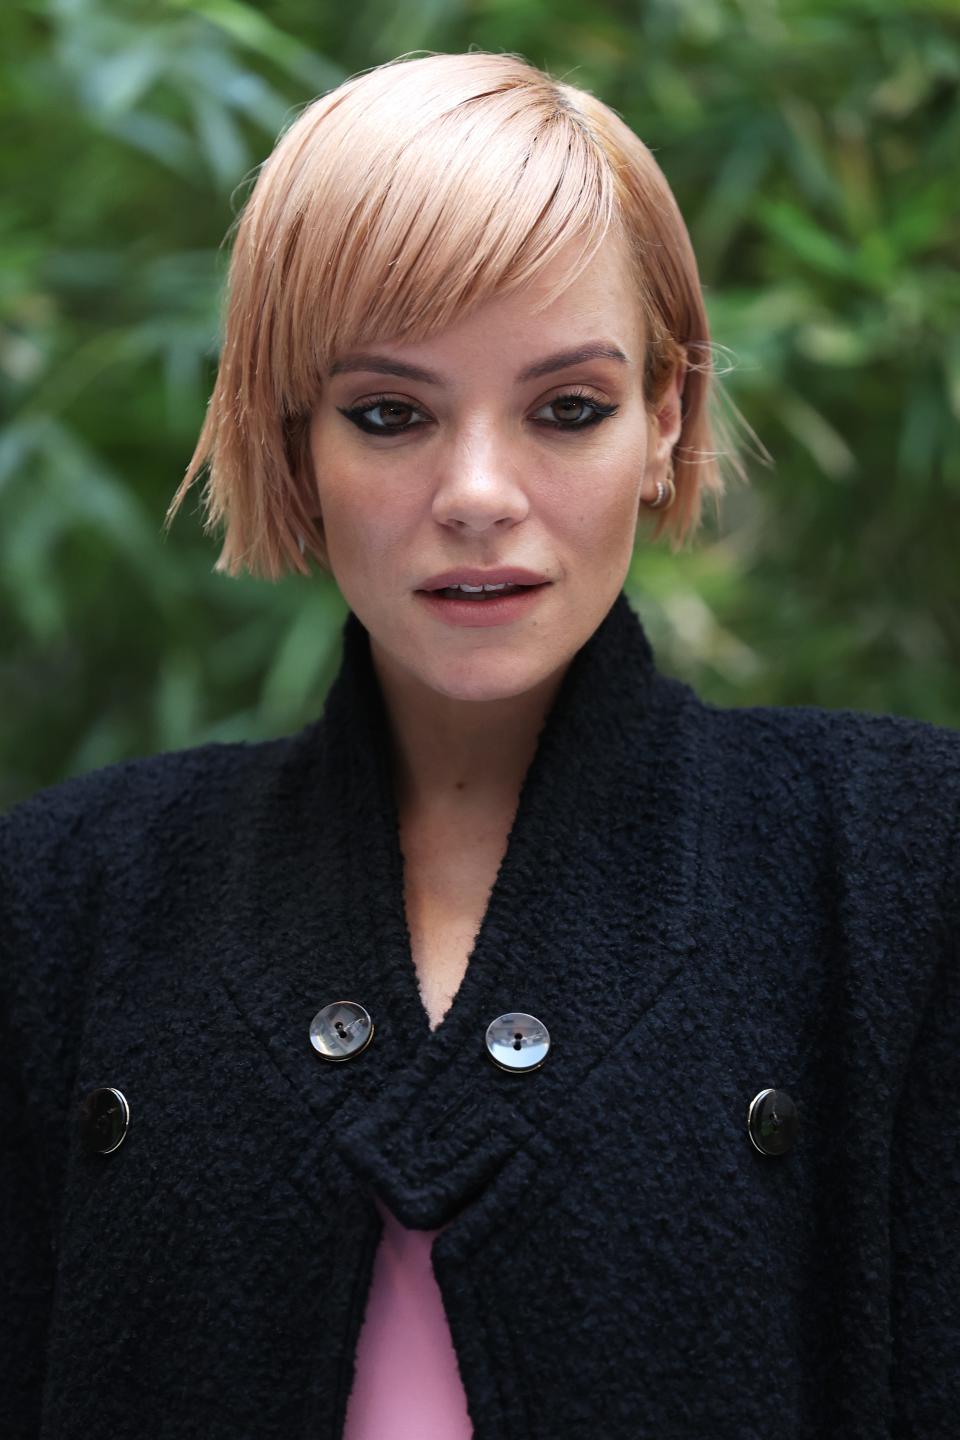 Lily Allen shares two daughters with her ex-husband Sam Cooper.